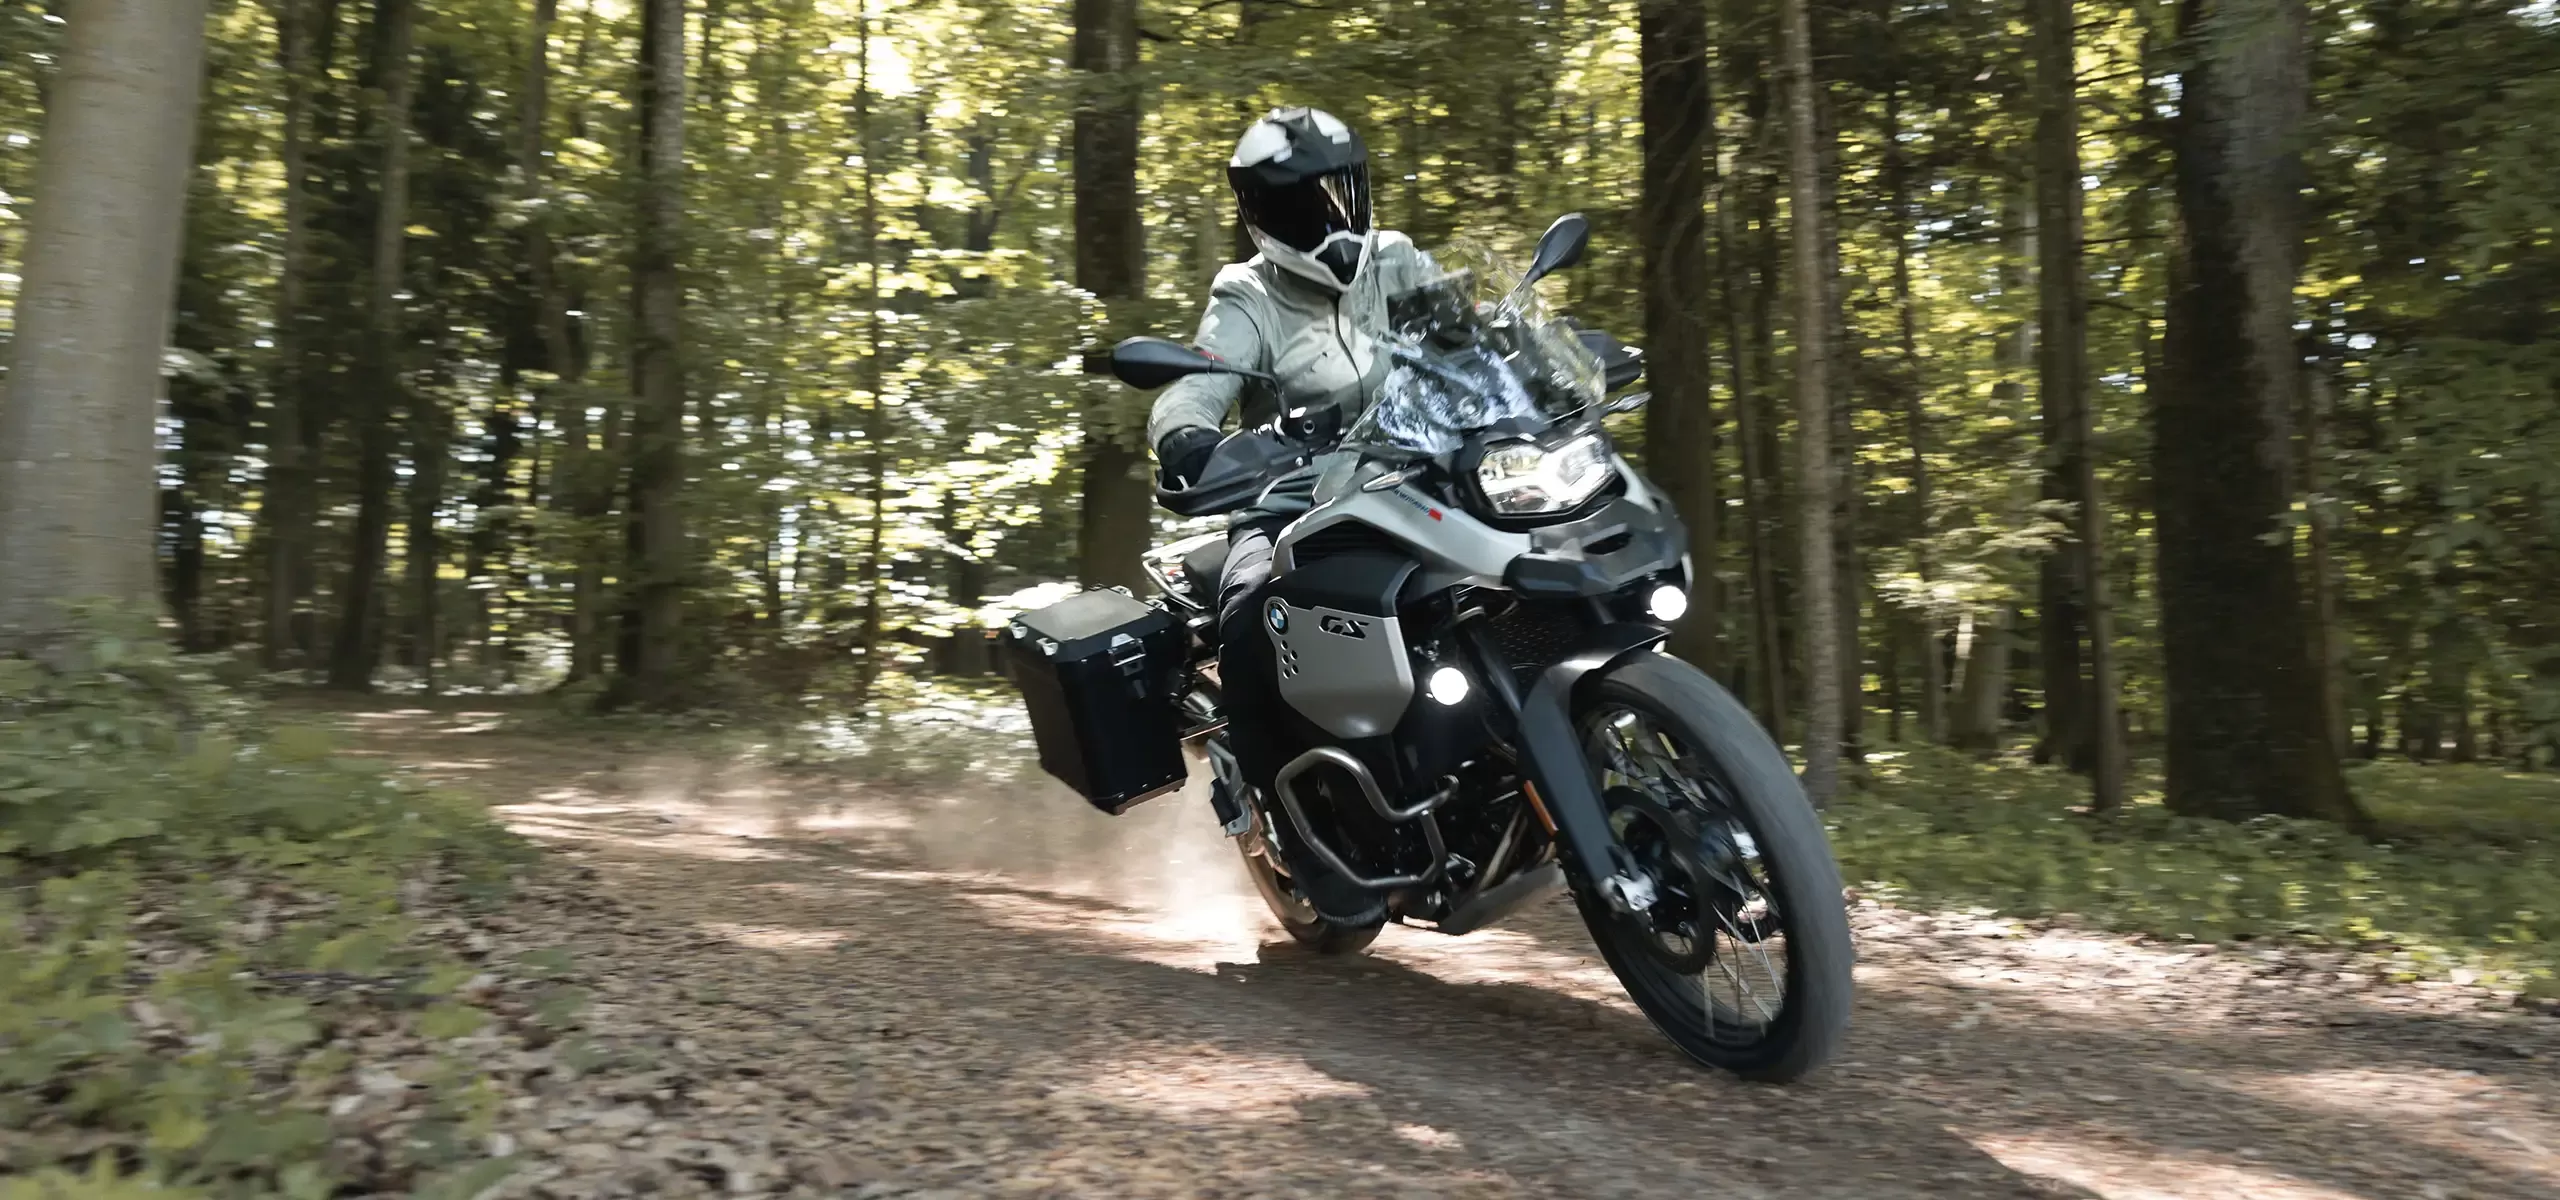 THE NEW F 900 GS ADVENTURE for sale at Roy Pidcock BMW